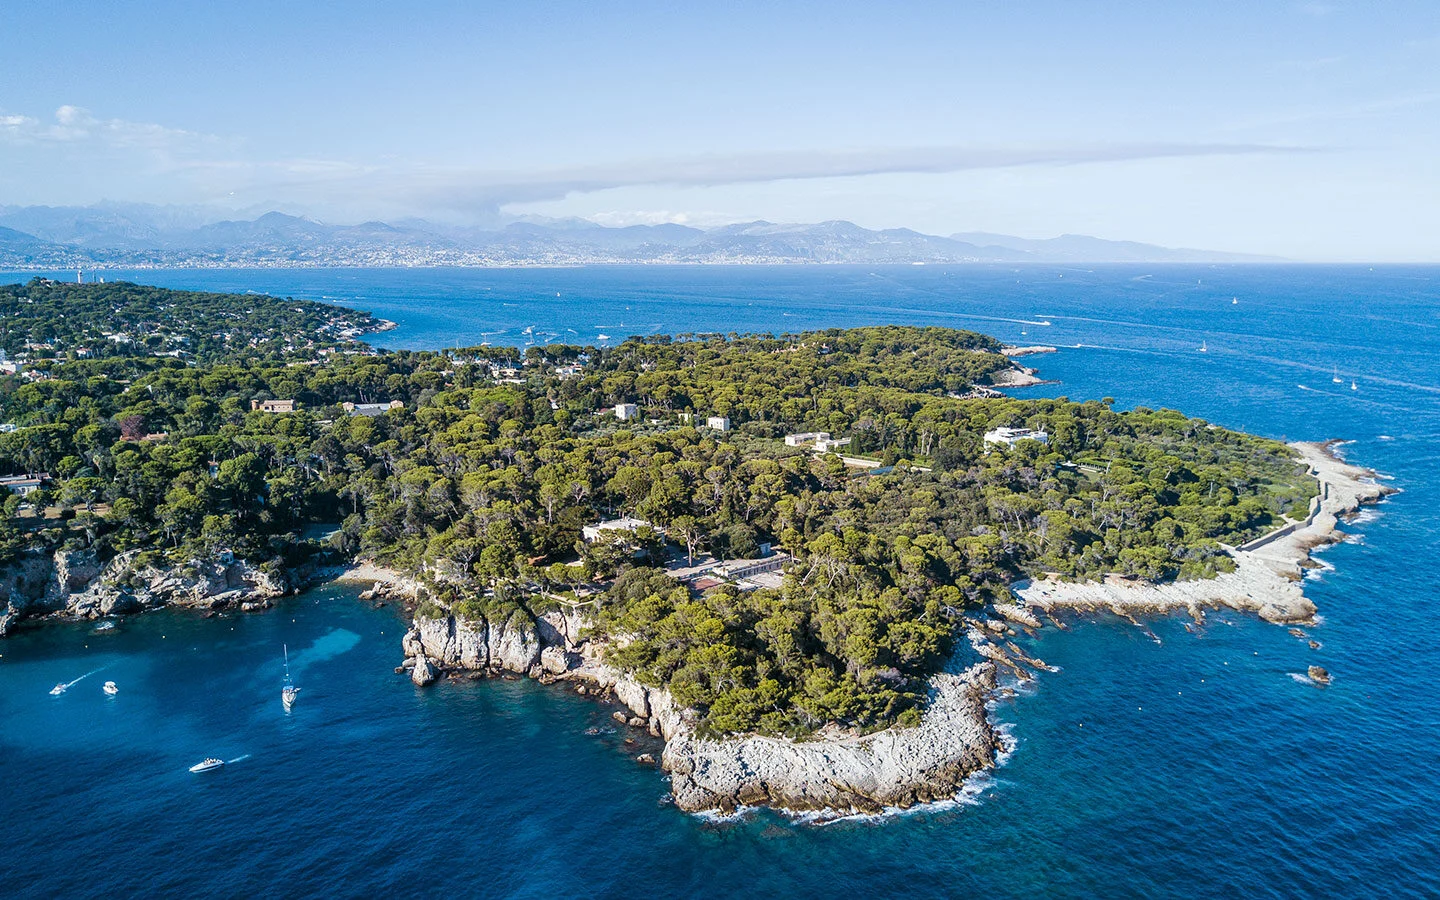 Aerial view of the Cap d’Antibes in the South of France